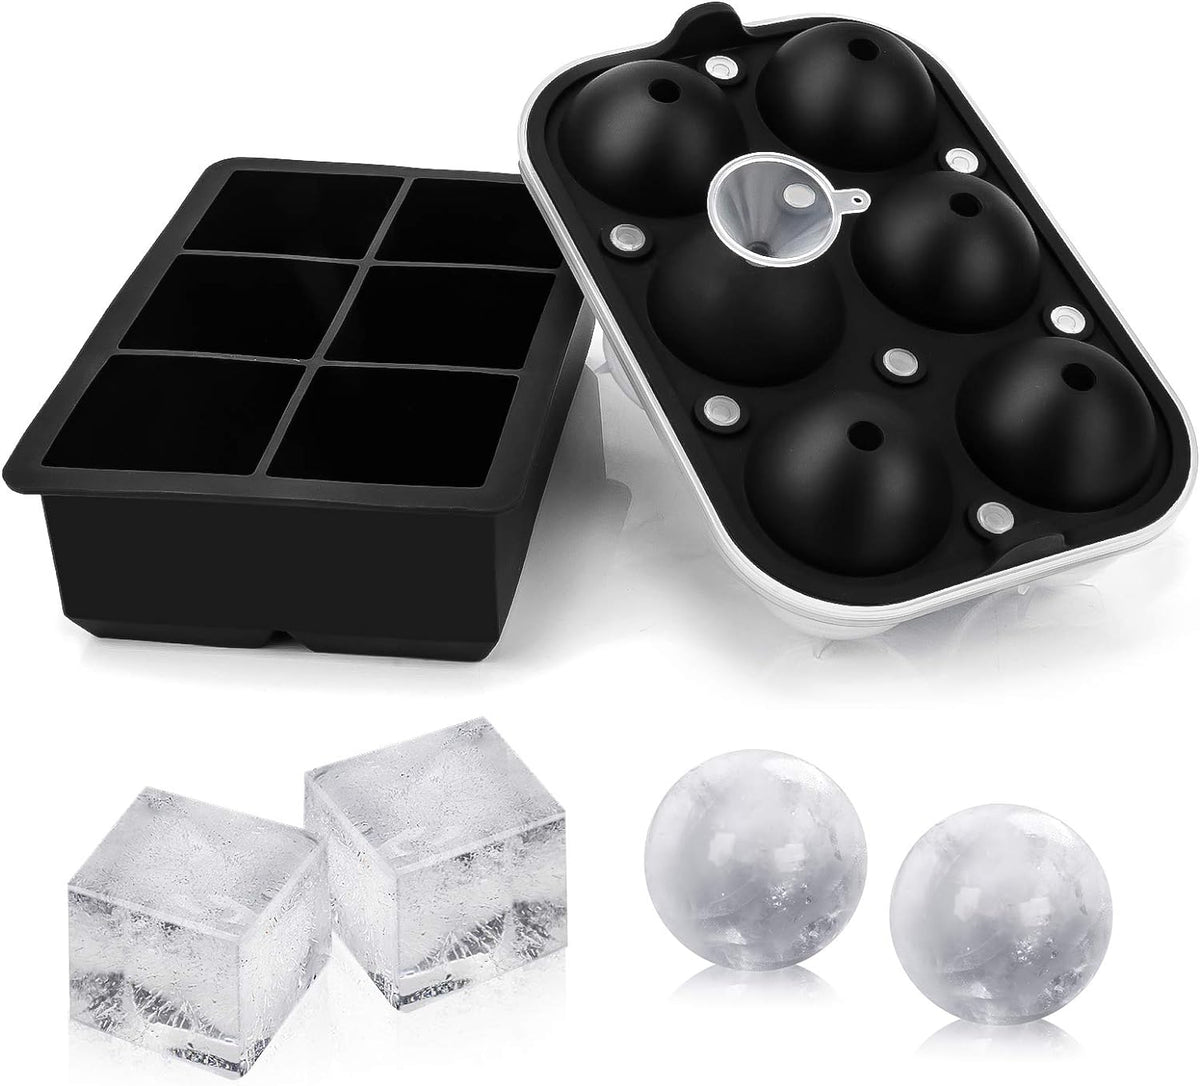 Black Round Silicon Ice Cube Ball Maker Tray 8 Large Sphere Molds